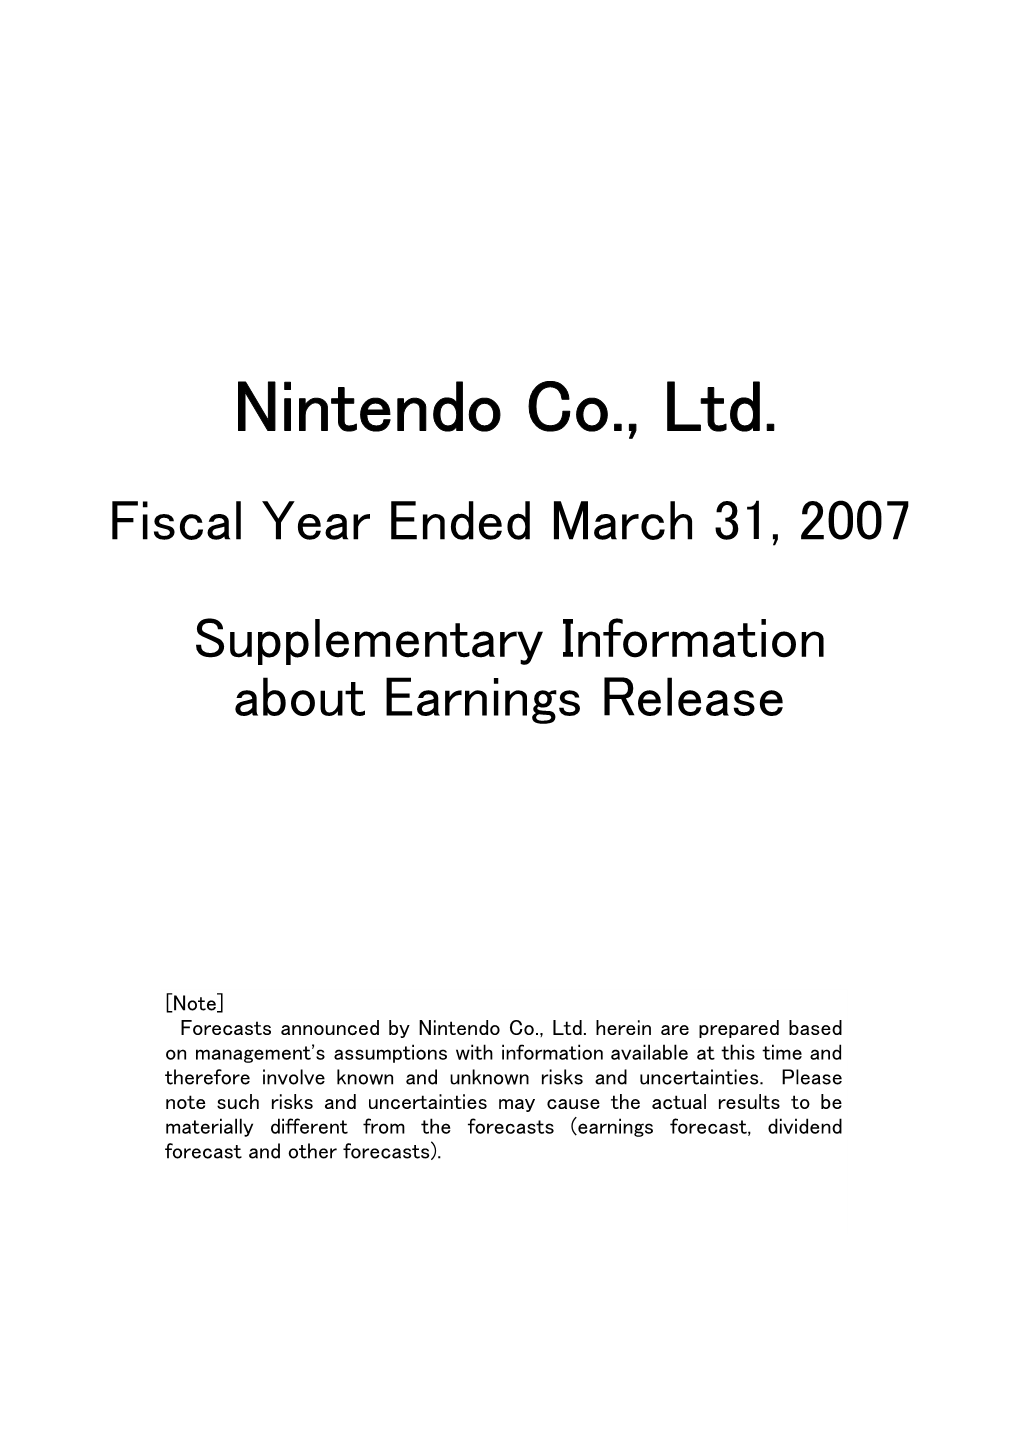 Nintendo Co., Ltd. Fiscal Year Ended March 31, 2007